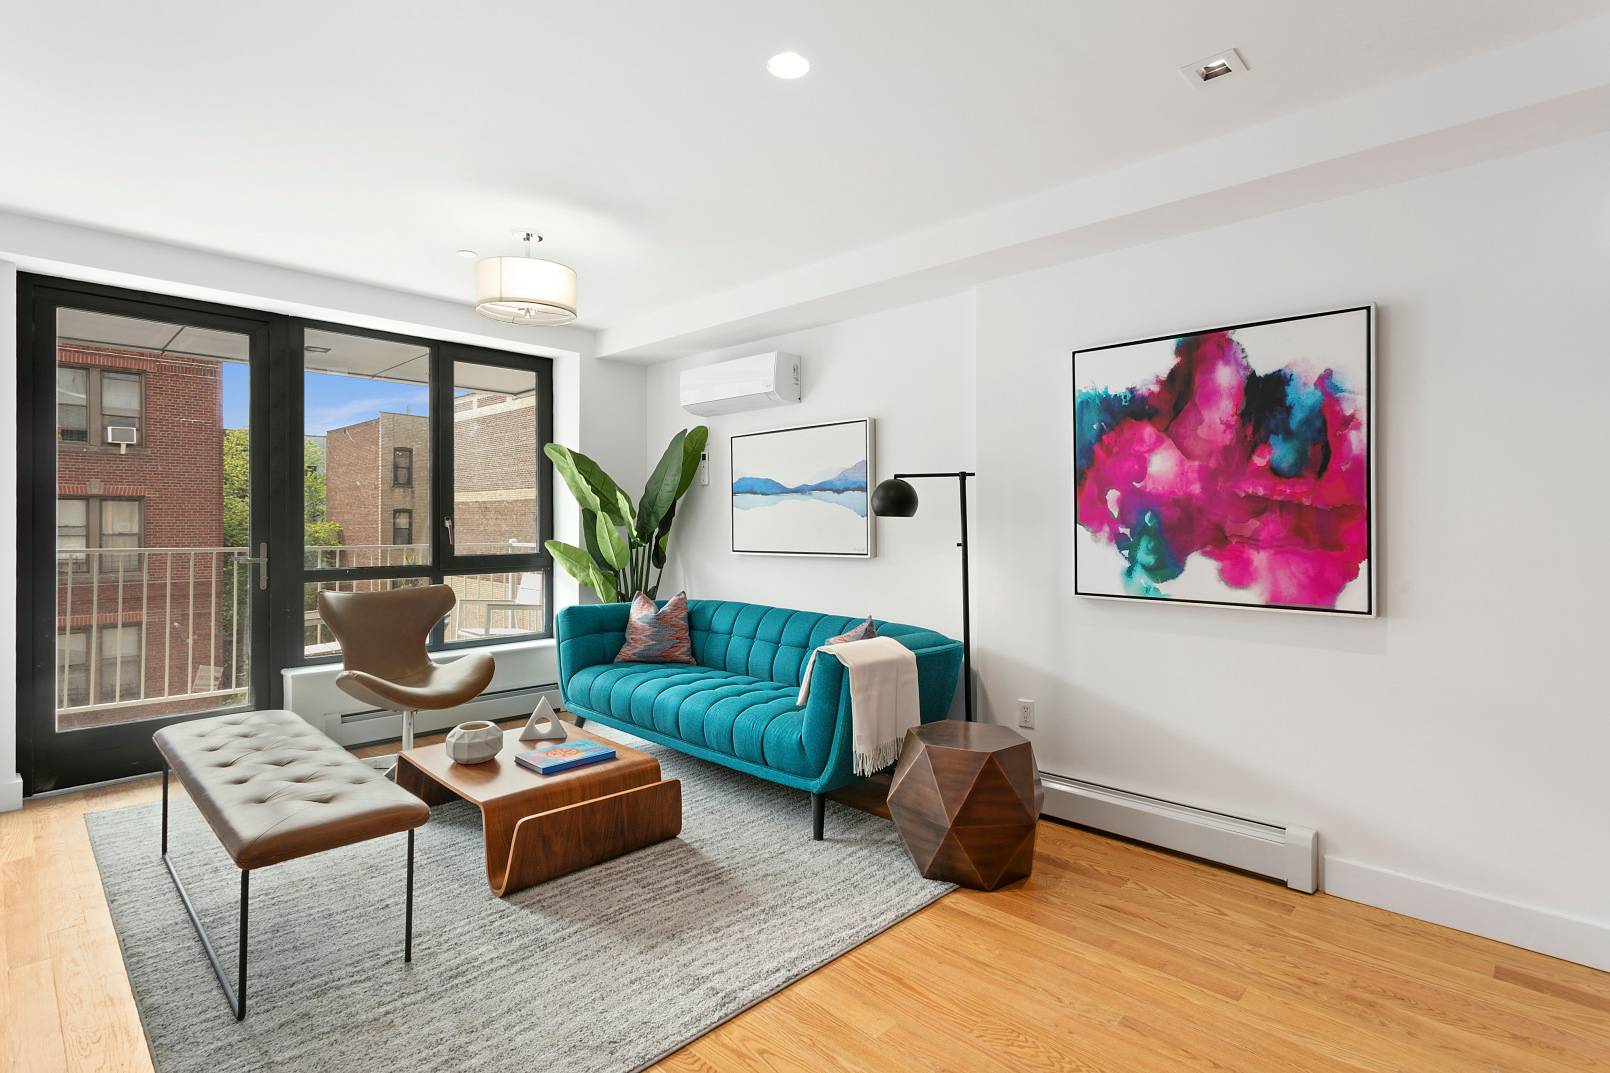 THE PARK 21 is a boutique 24 unit rental building nestled between two quiet tree lined blocks offering a refreshingly modern and sleek take on Brooklyn living.